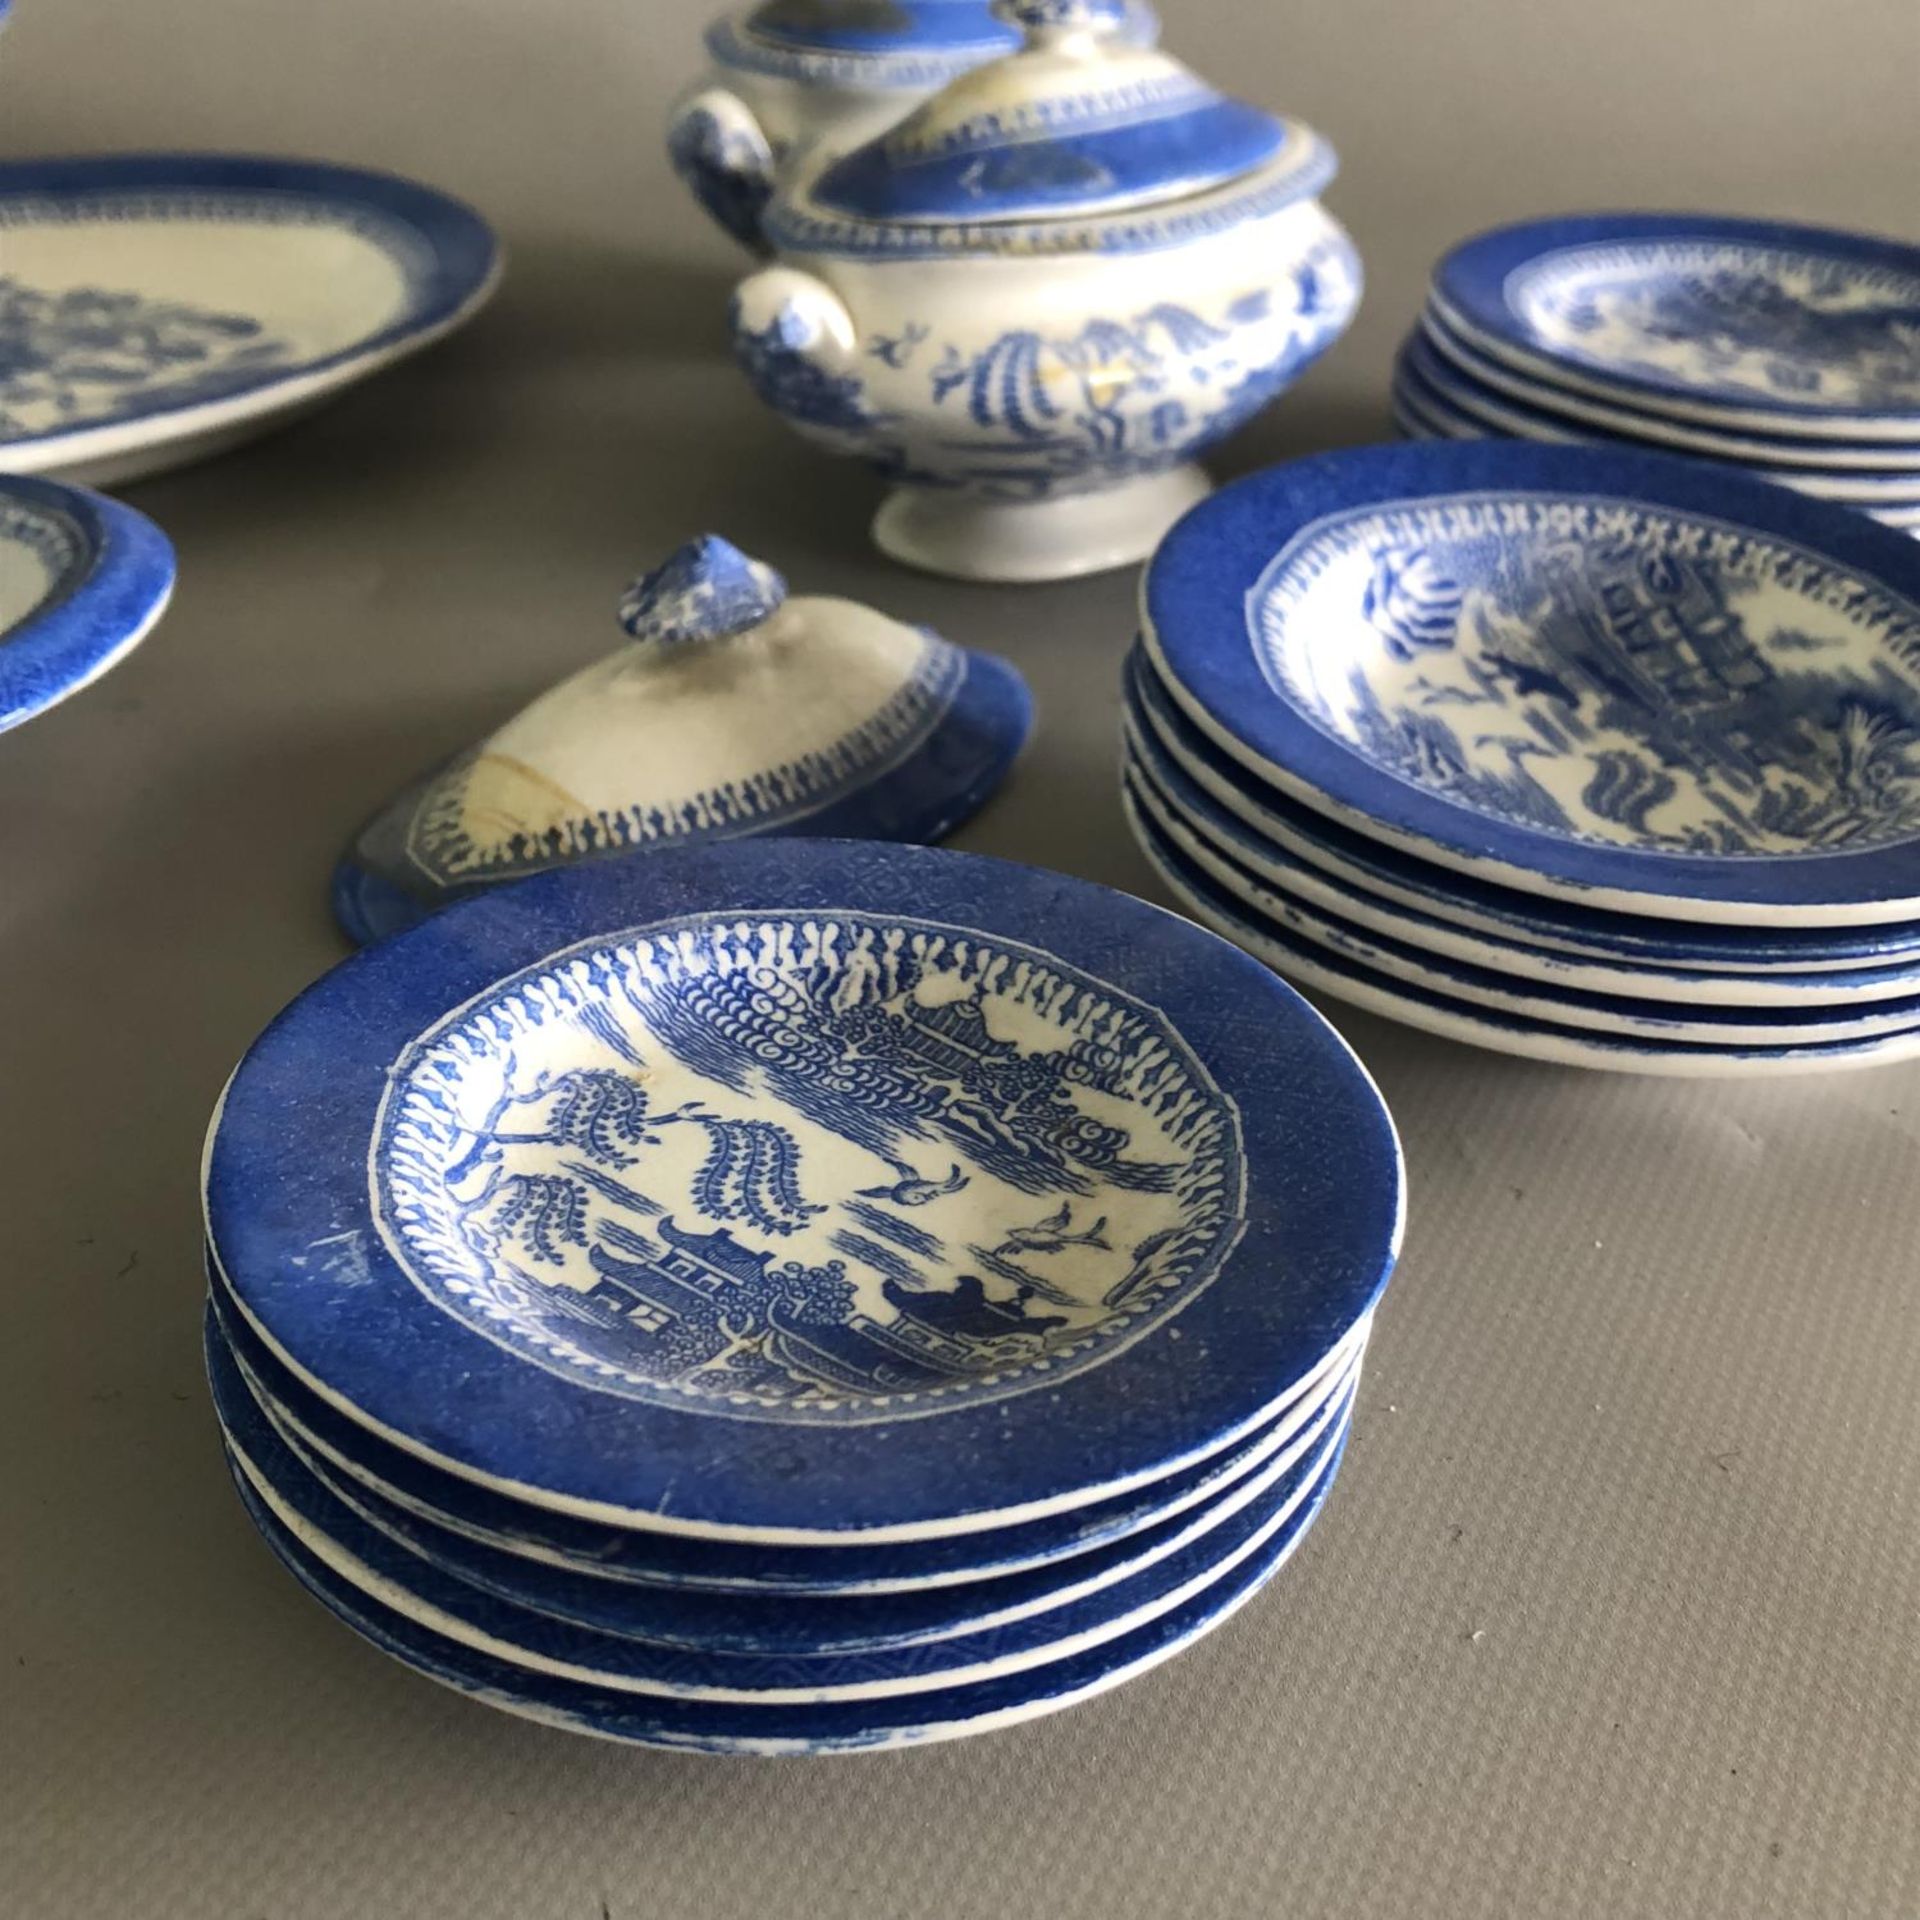 Copeland - Antique Willow Pattern Toy Child's Dinner Service 31 Pieces - c1860 - Image 2 of 9